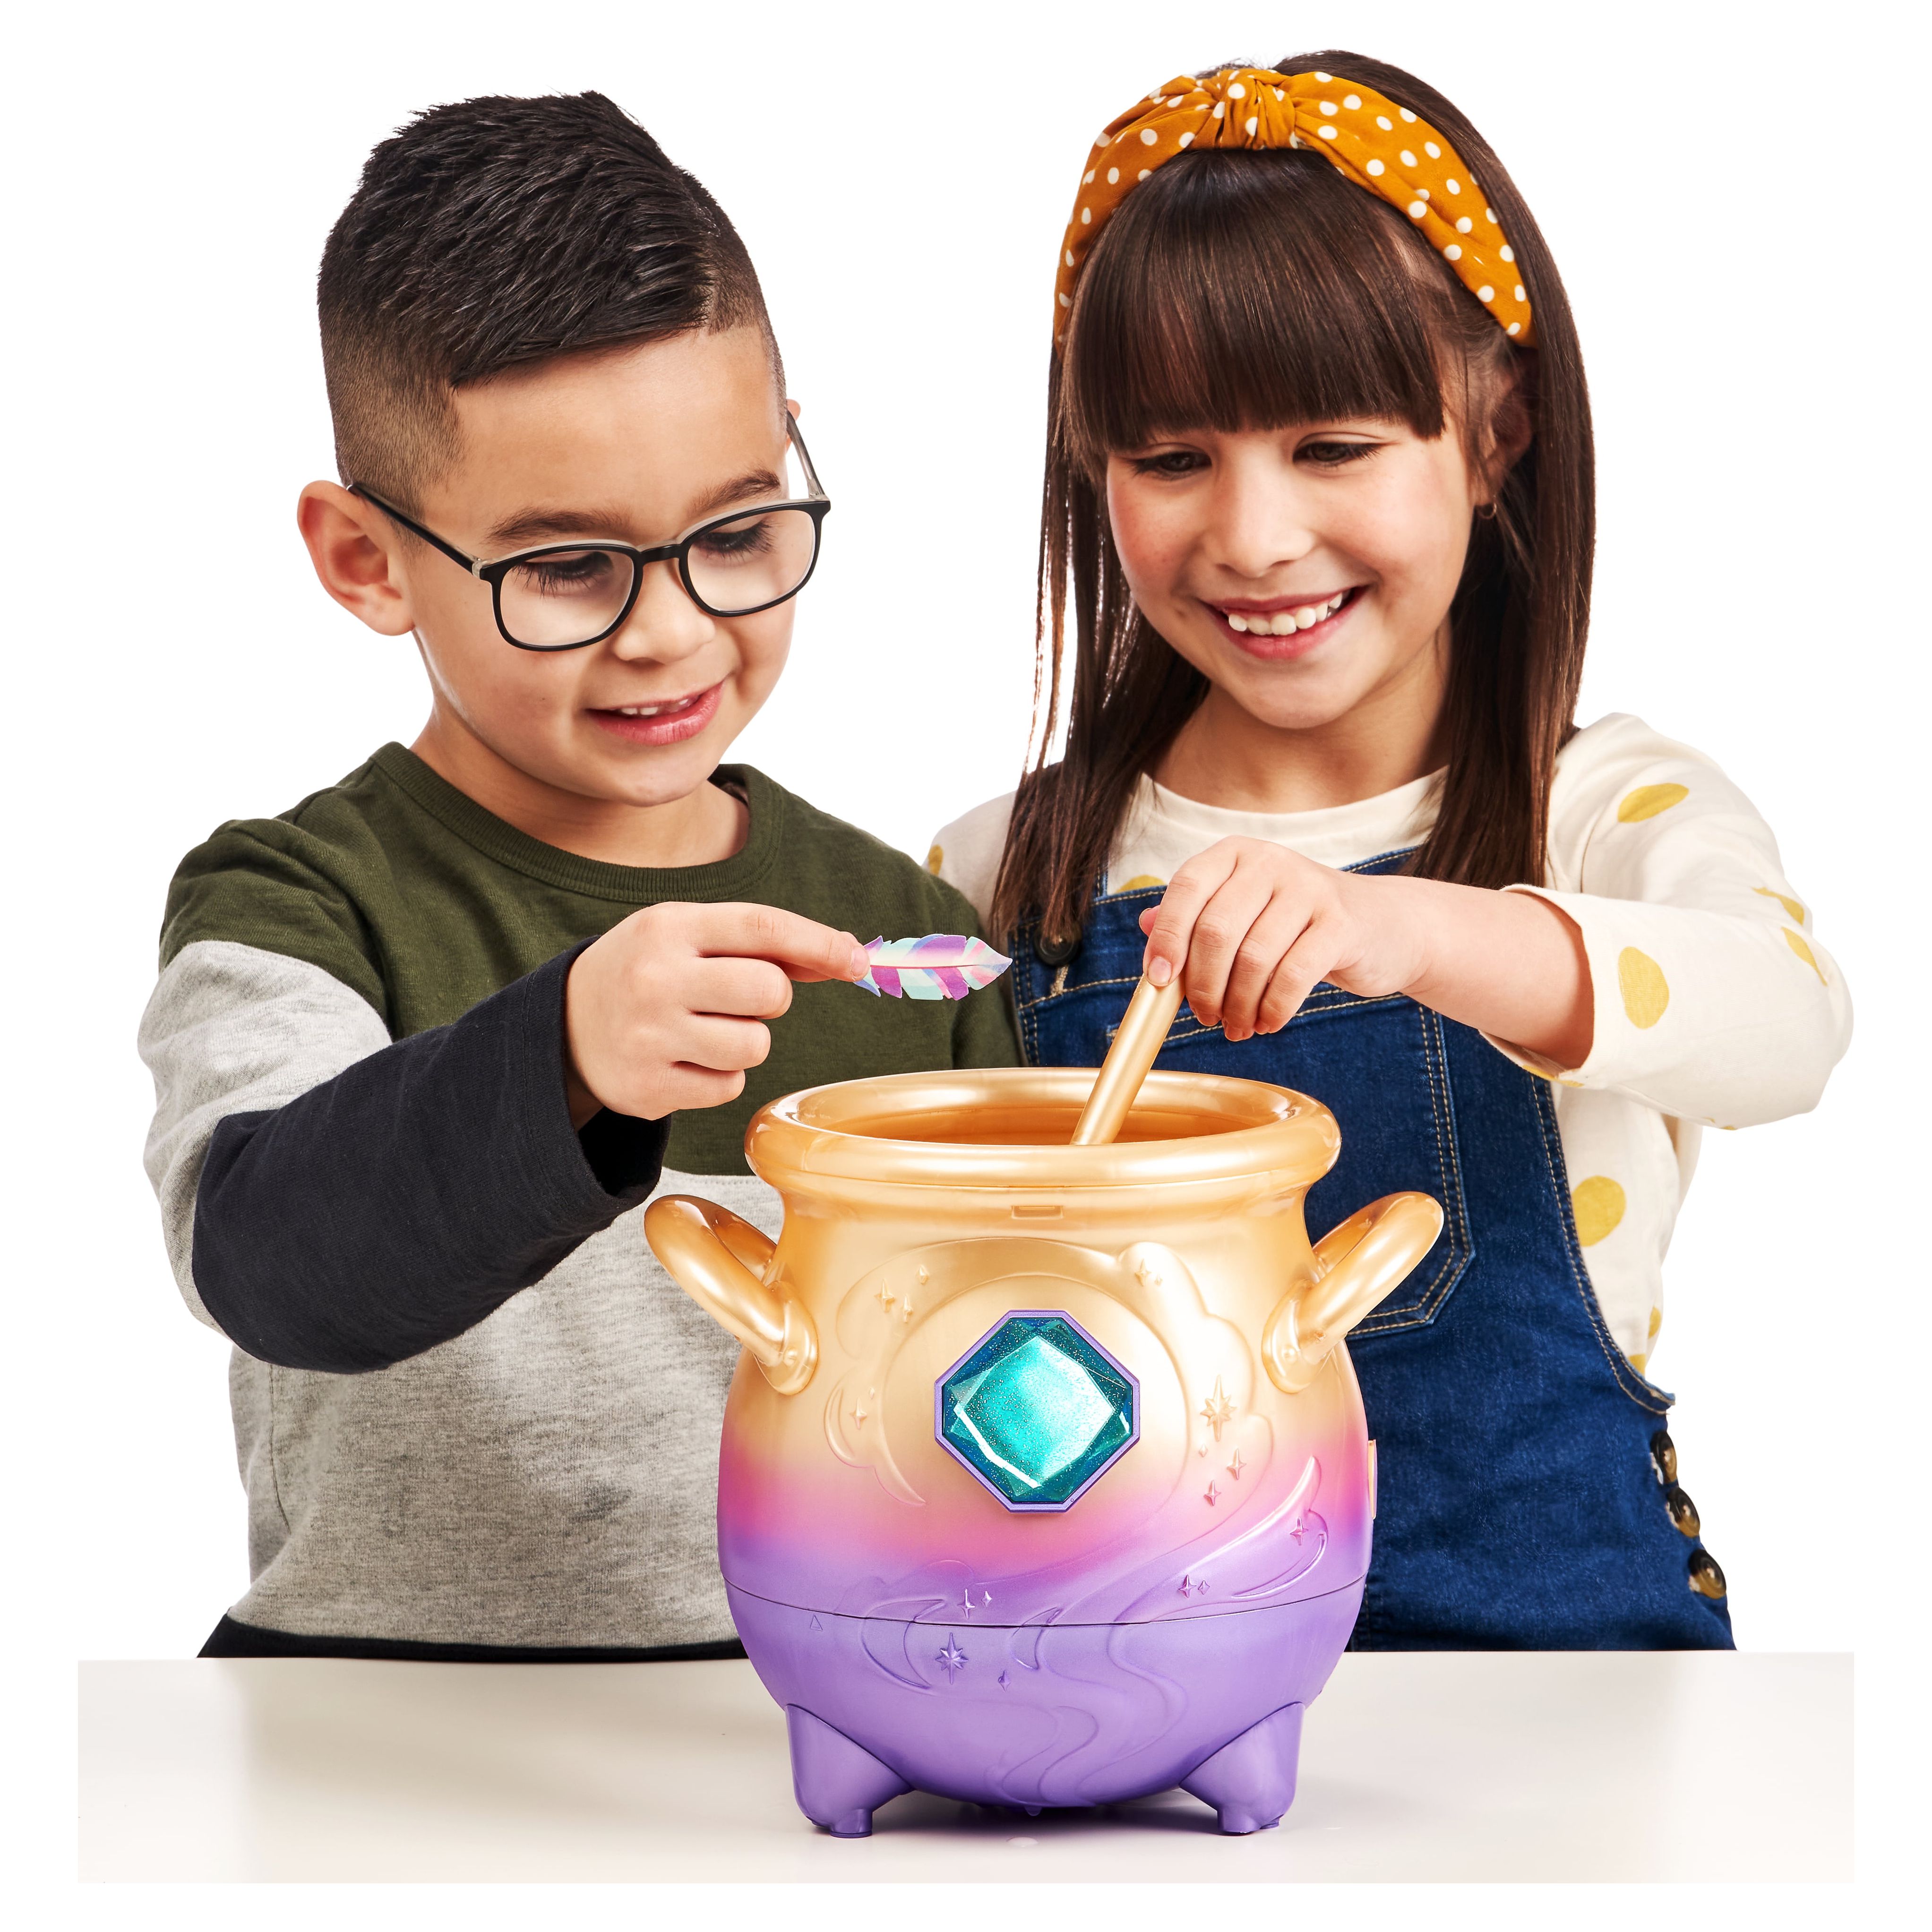 Magic Mixies Magical Misting Cauldron with Interactive 8 inch Blue Plush Toy and 50+ Sounds and Reactions, Toys for Kids, Ages 5+ - image 4 of 15